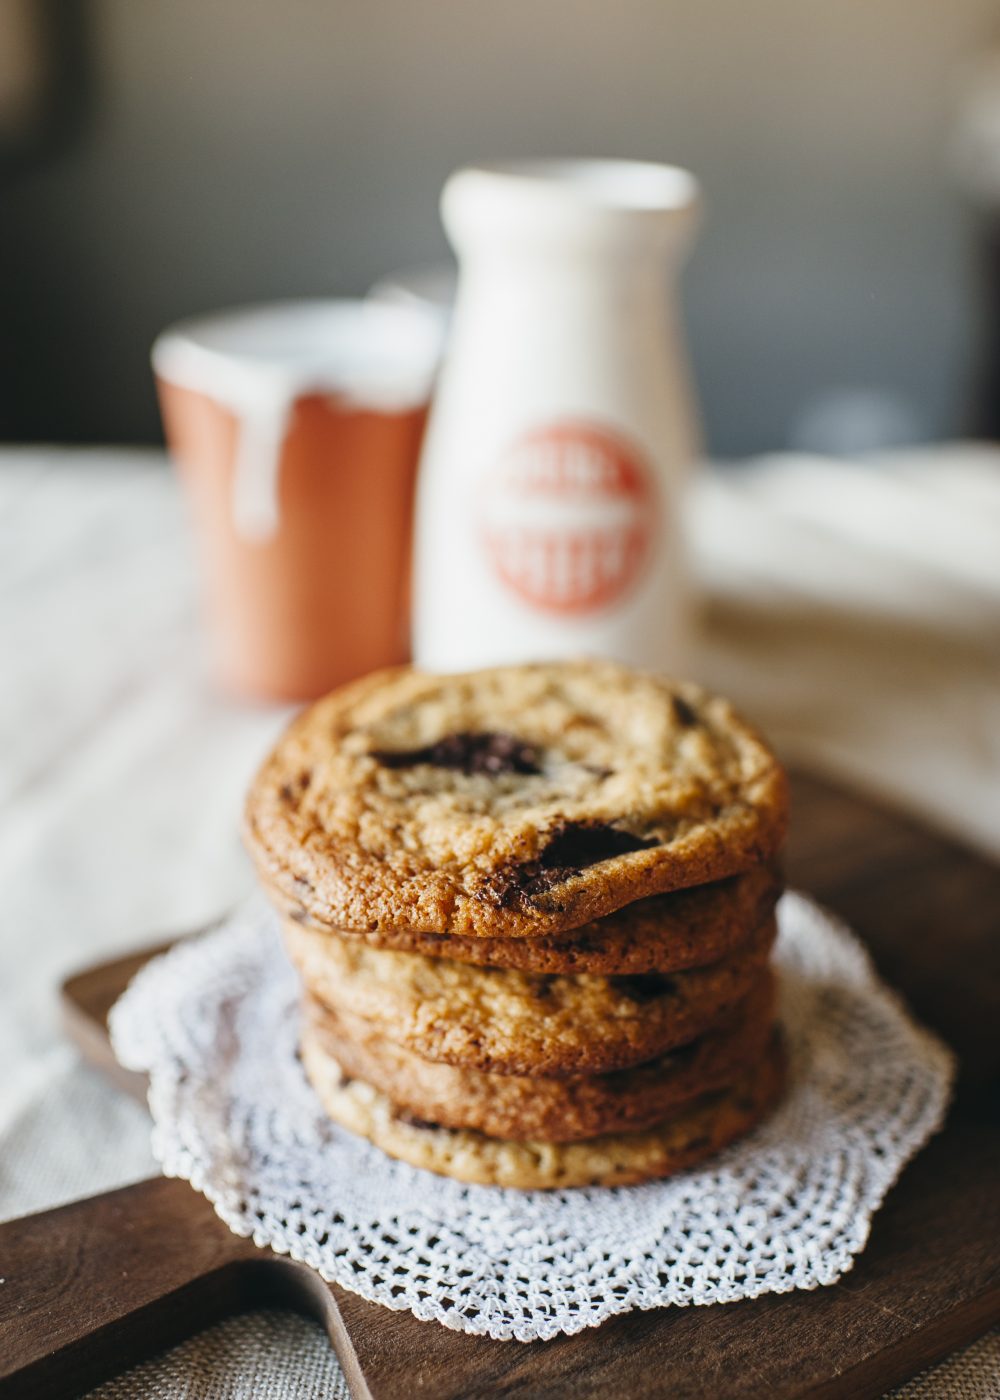 Miso Chocolate Chip Cookies, Miso Chocolate Chip Cookies